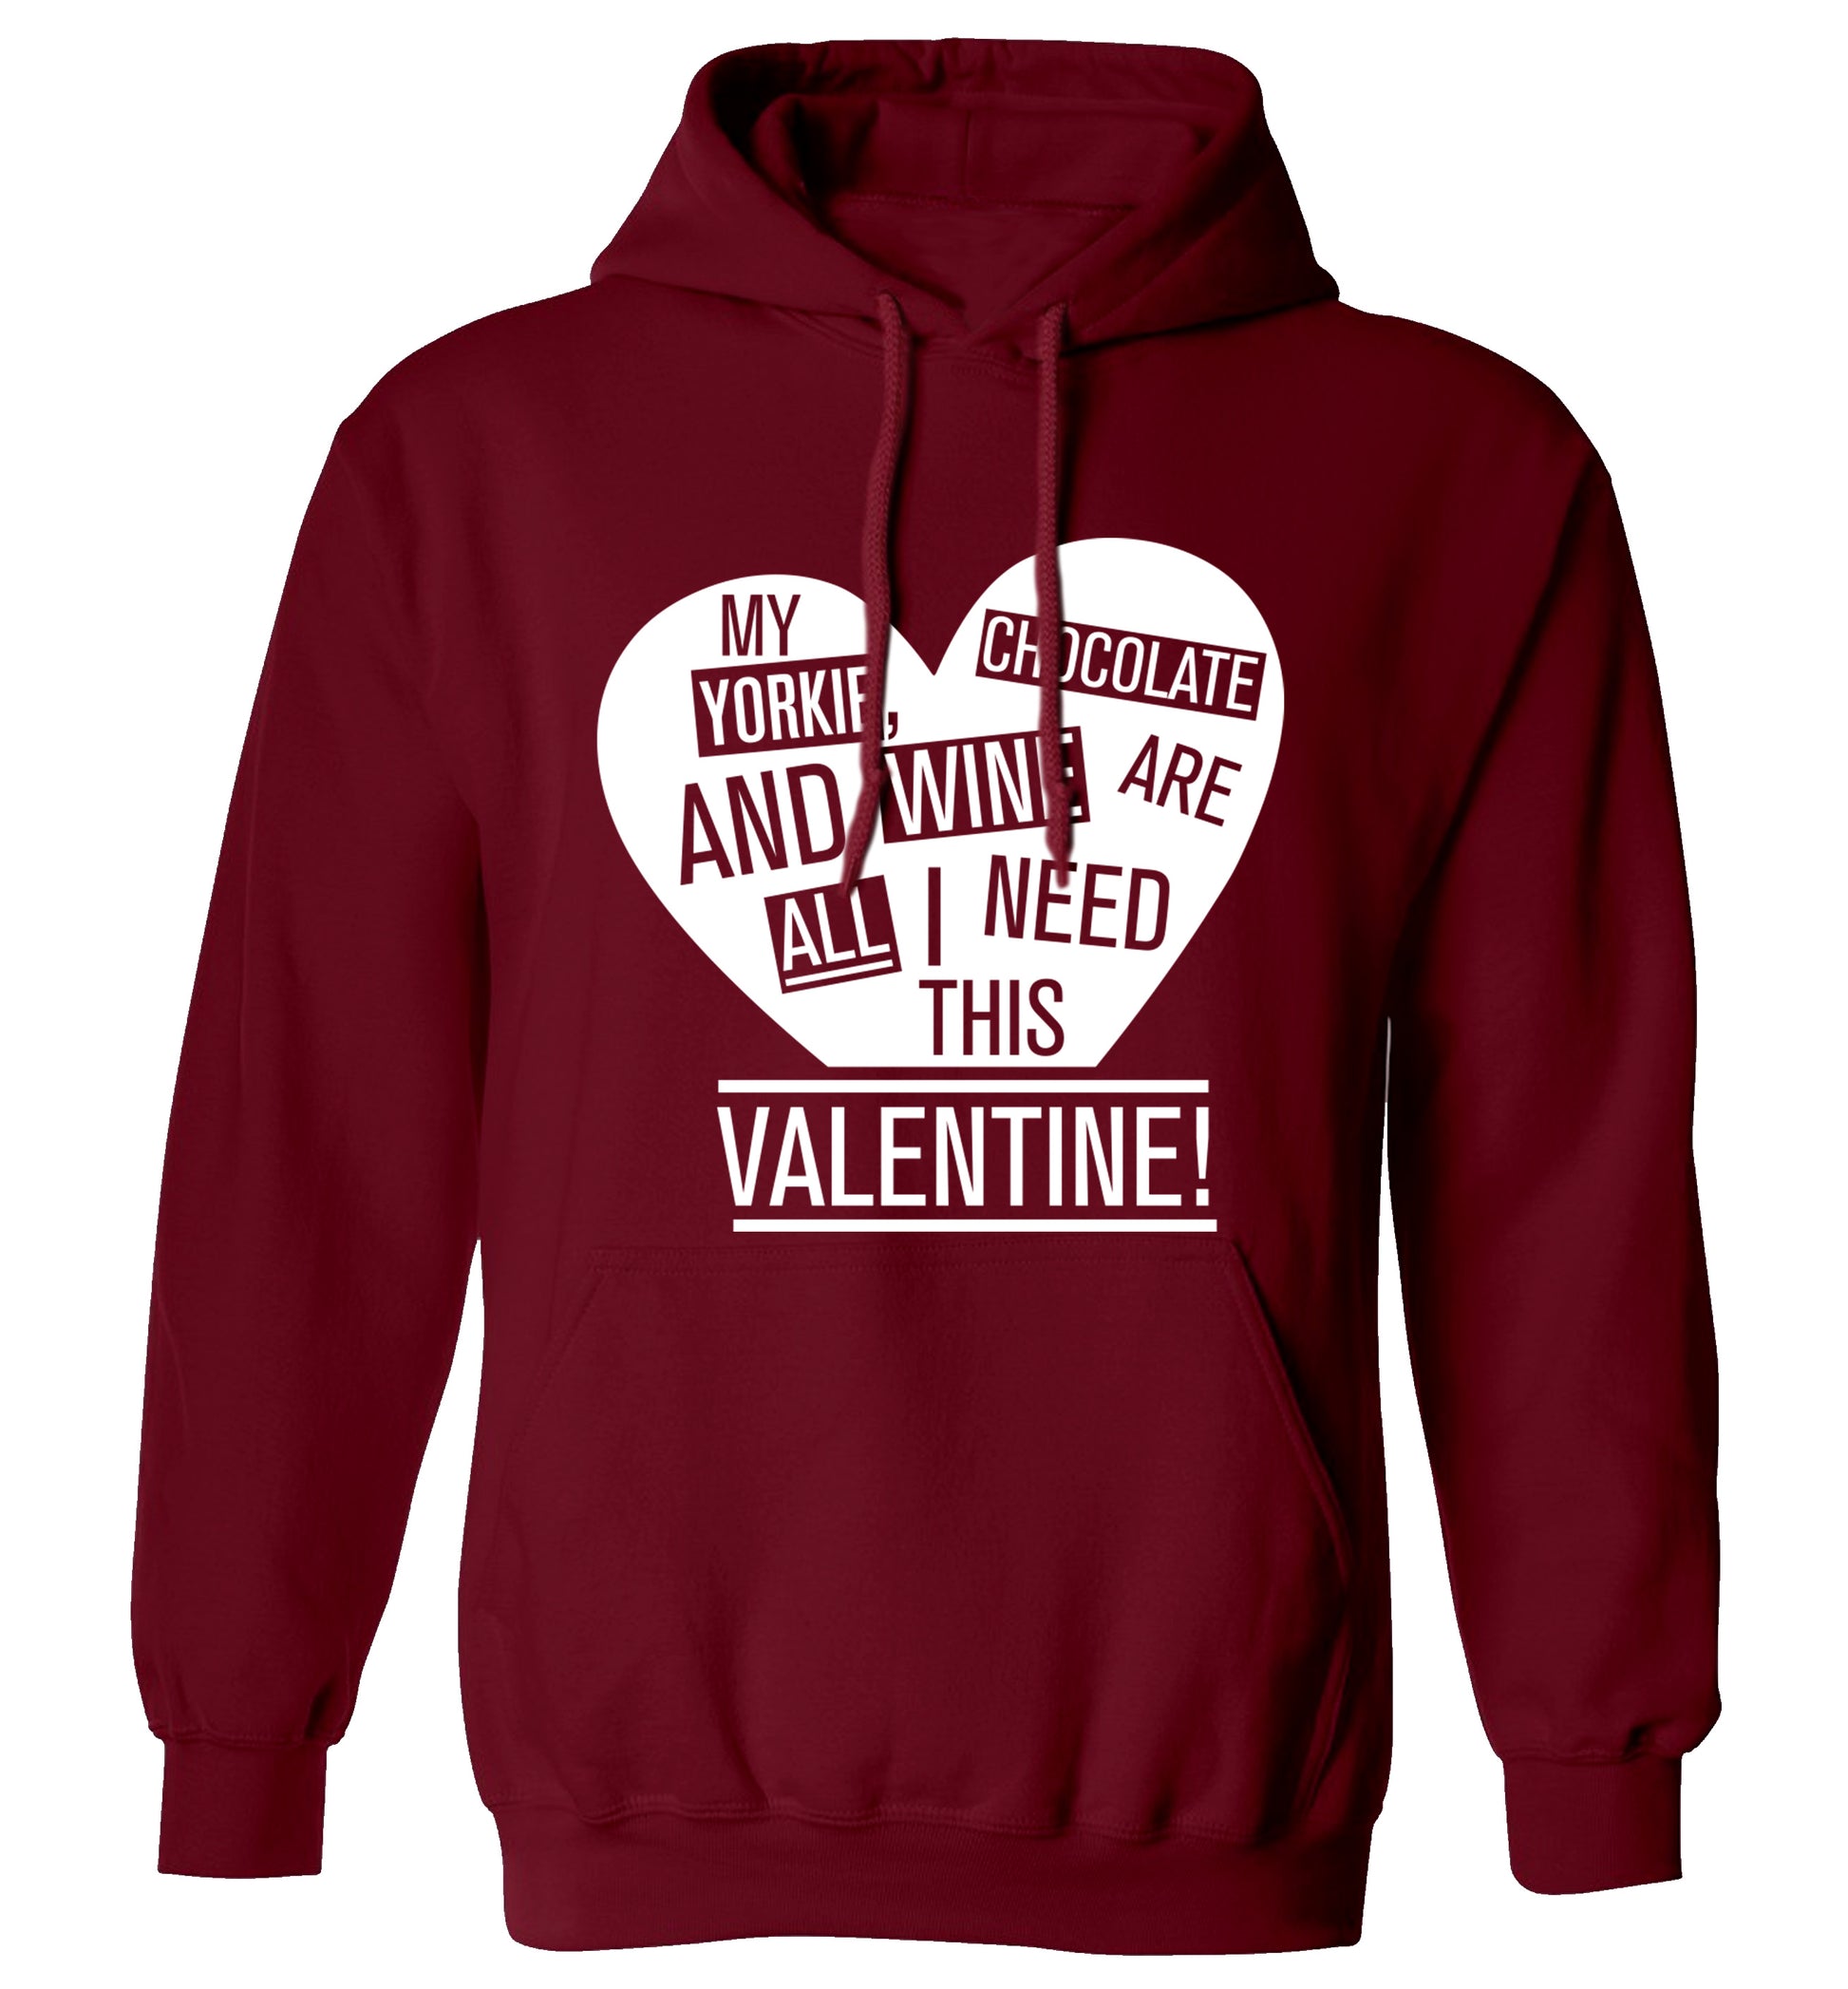 My yorkie, chocolate and wine are all I need this valentine! adults unisex maroon hoodie 2XL